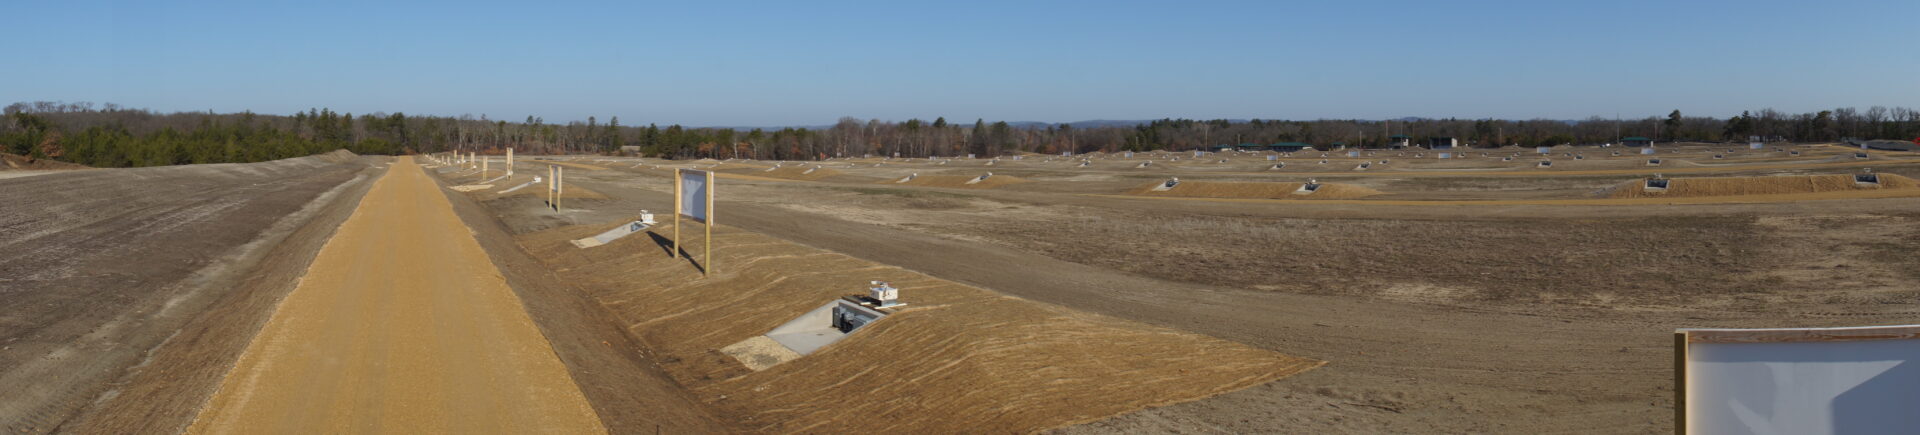 A panoramic view of a construction site with various stages of infrastructure development on a clear day.